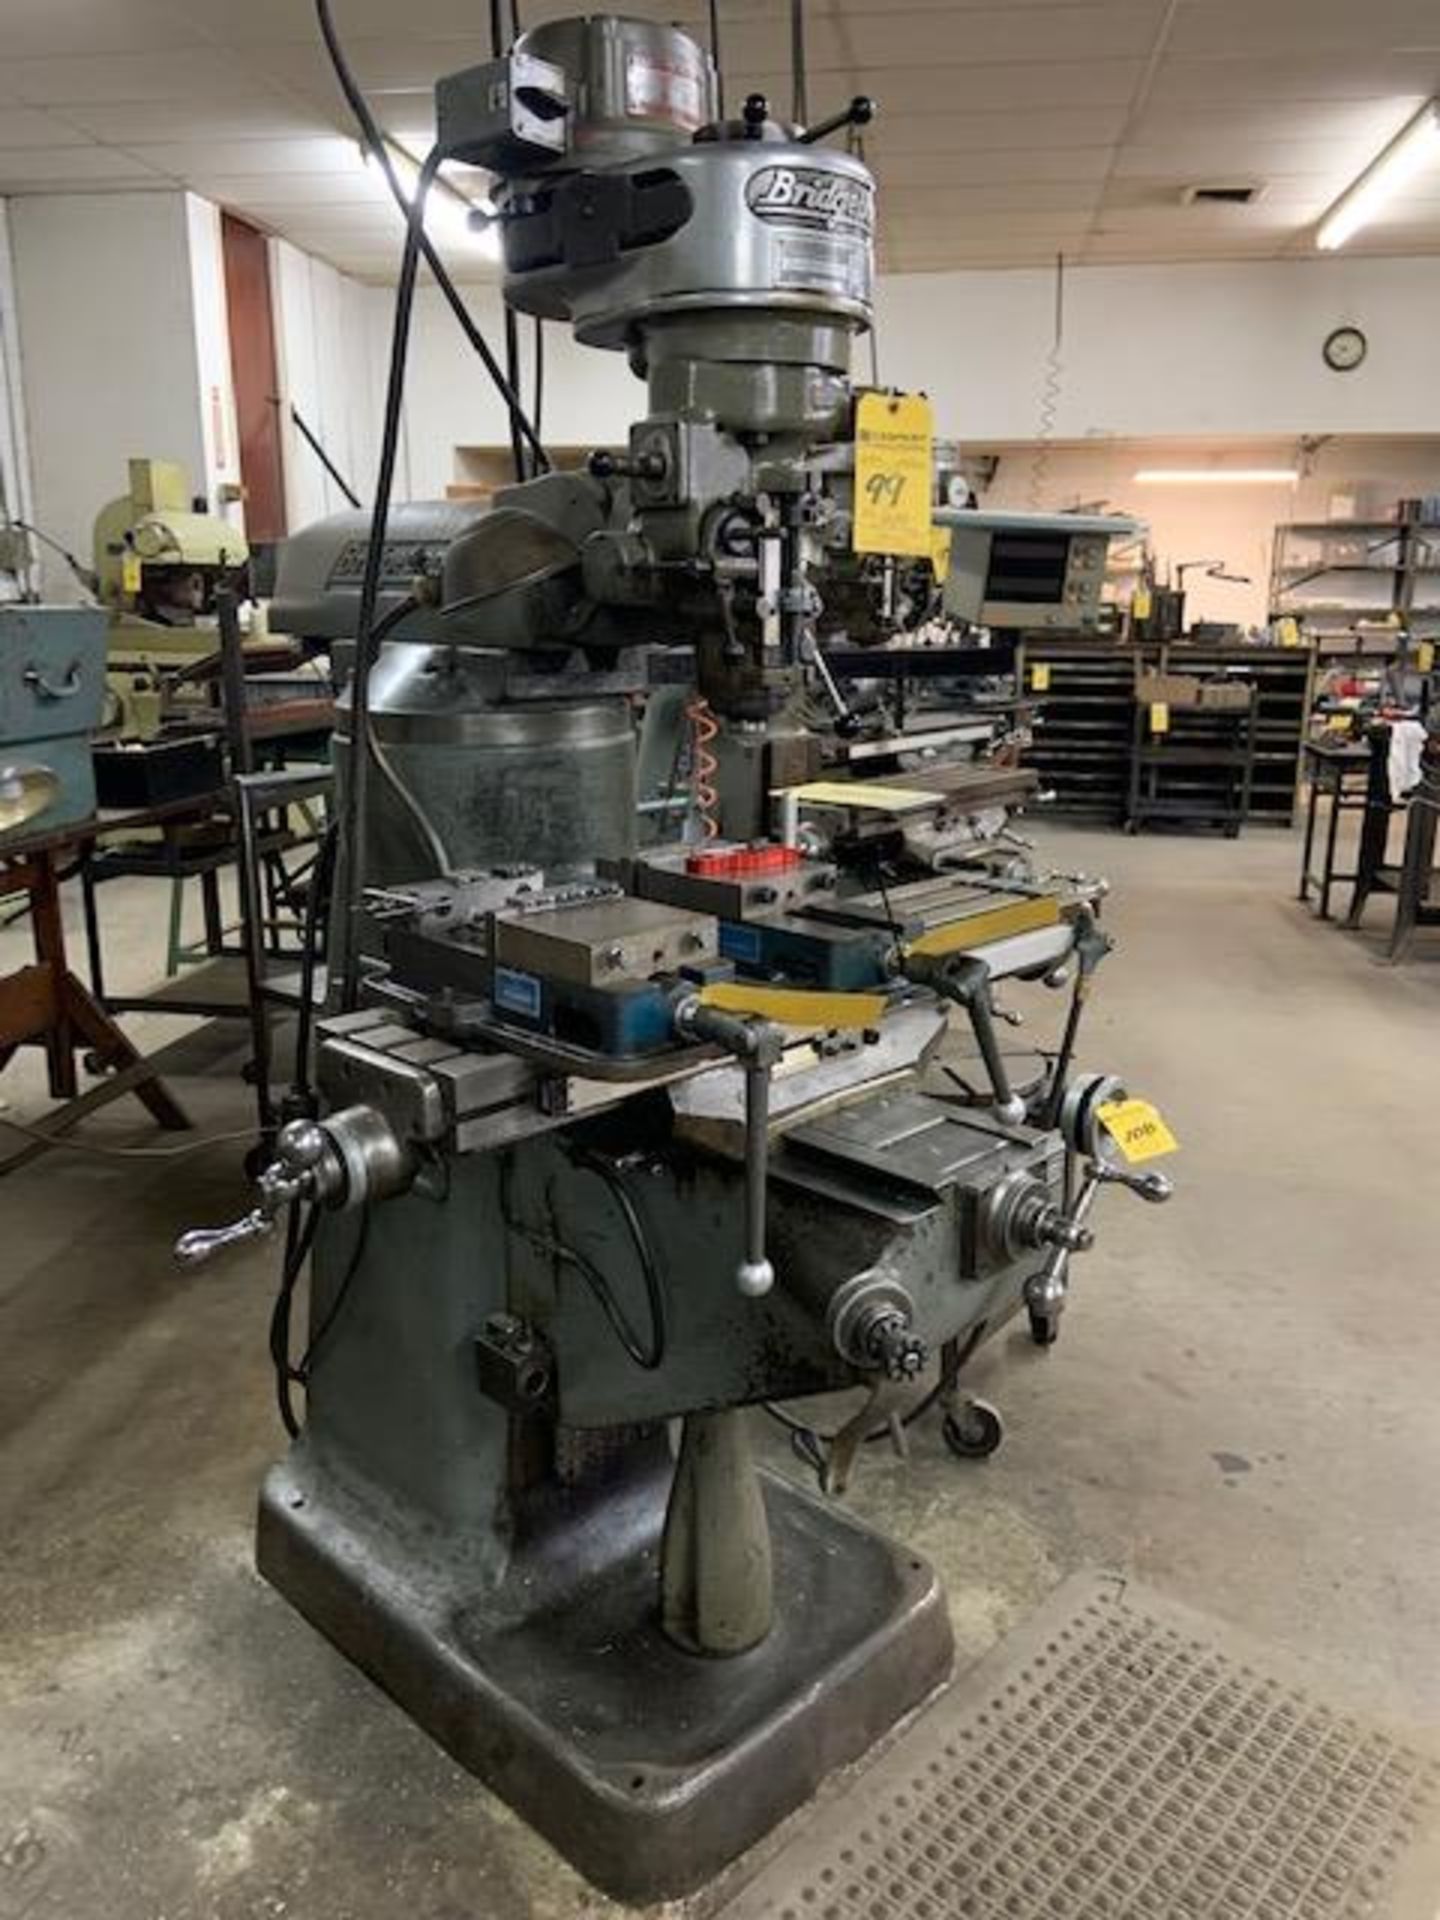 BRT Milling Machine J-66259 Spindle Speed, 9" x 42" T-Slot Table, 12/BR 7372 - Image 2 of 2